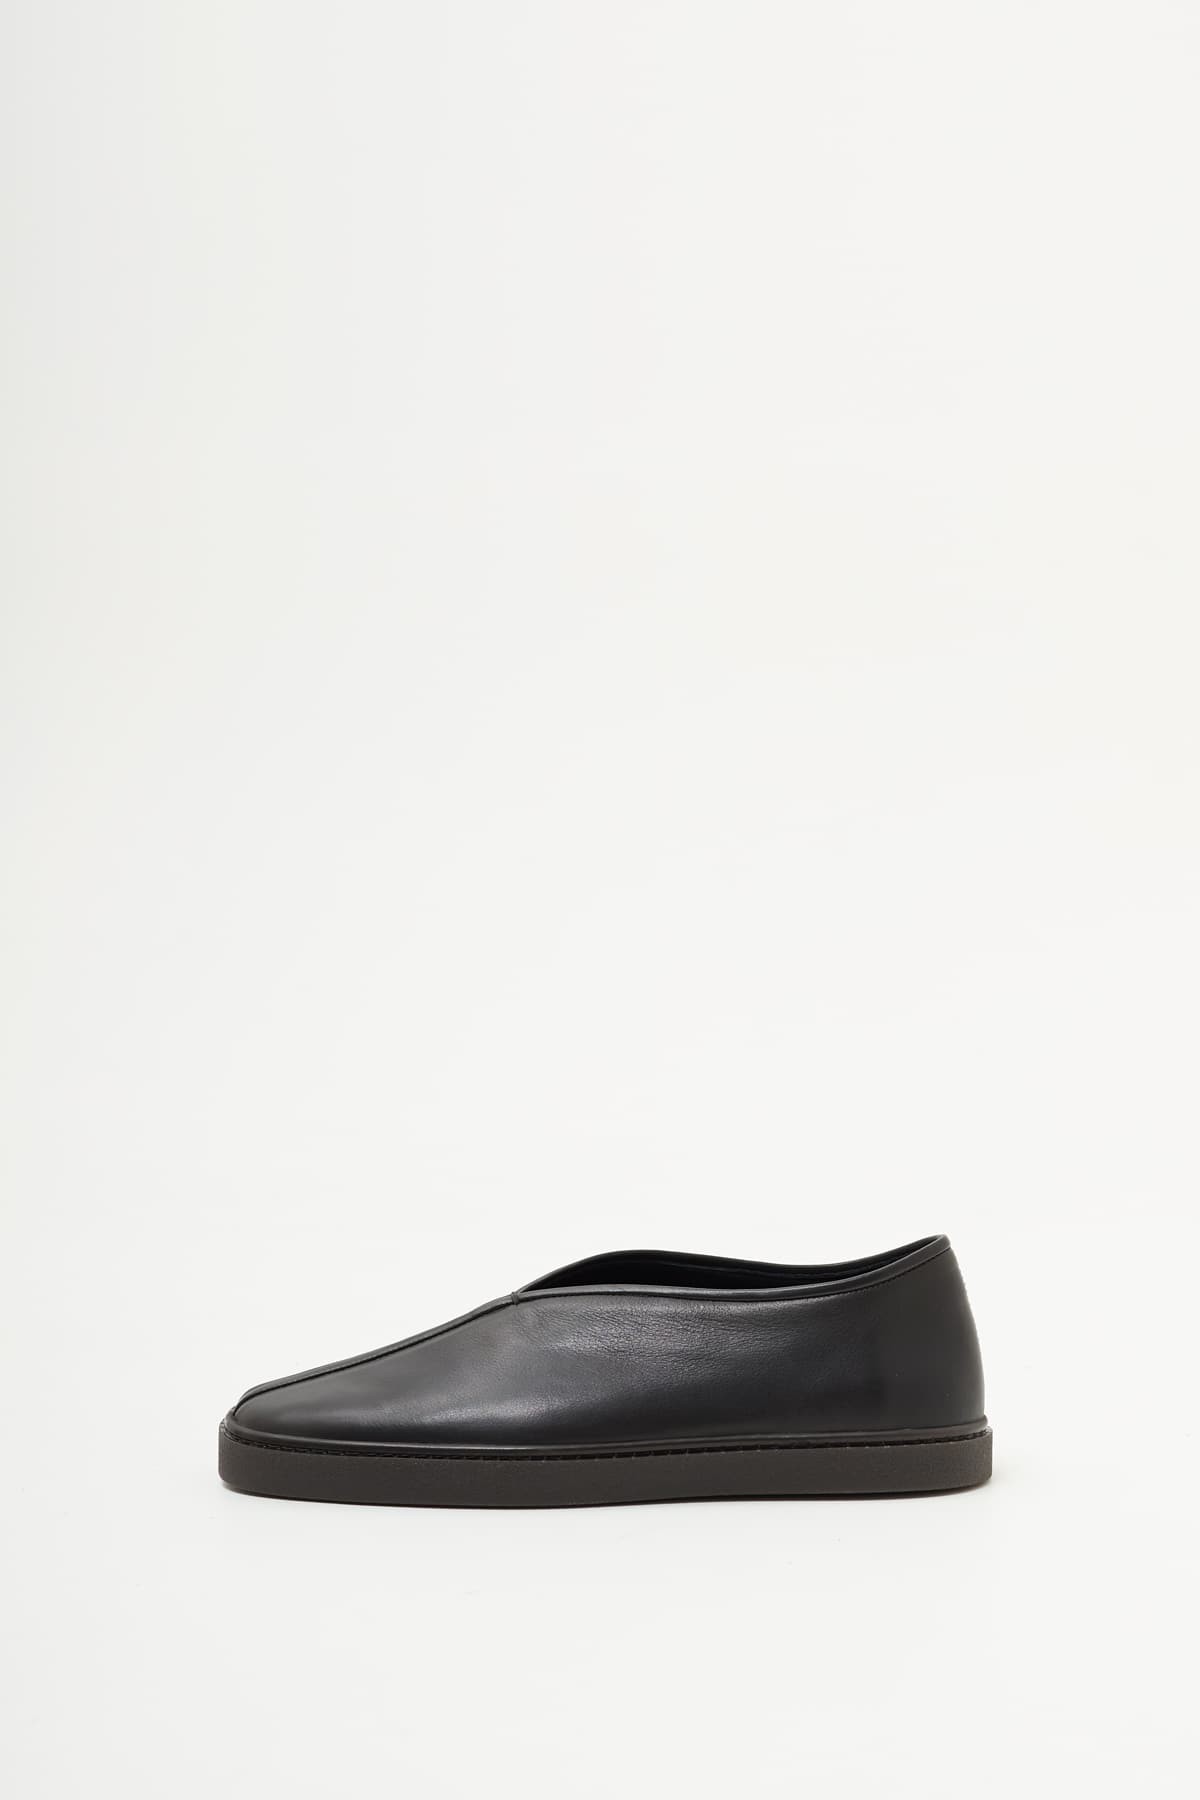 LEMAIRE BLACK PIPED SNEAKERS IAMNUE